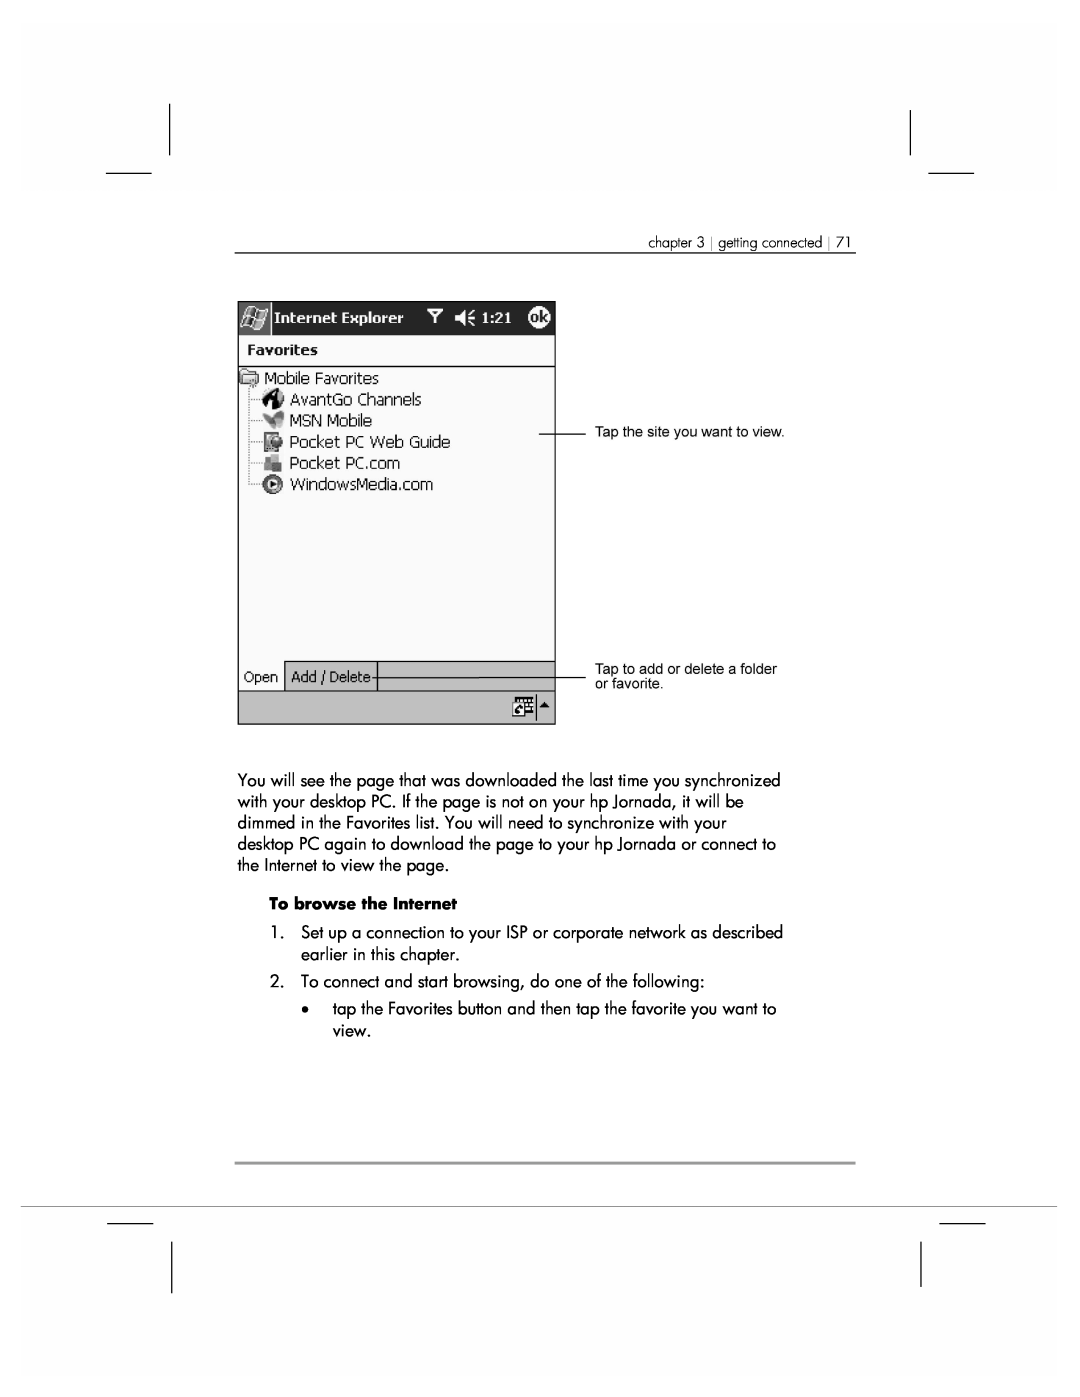 HP 920 manual To connect and start browsing, do one of the following 